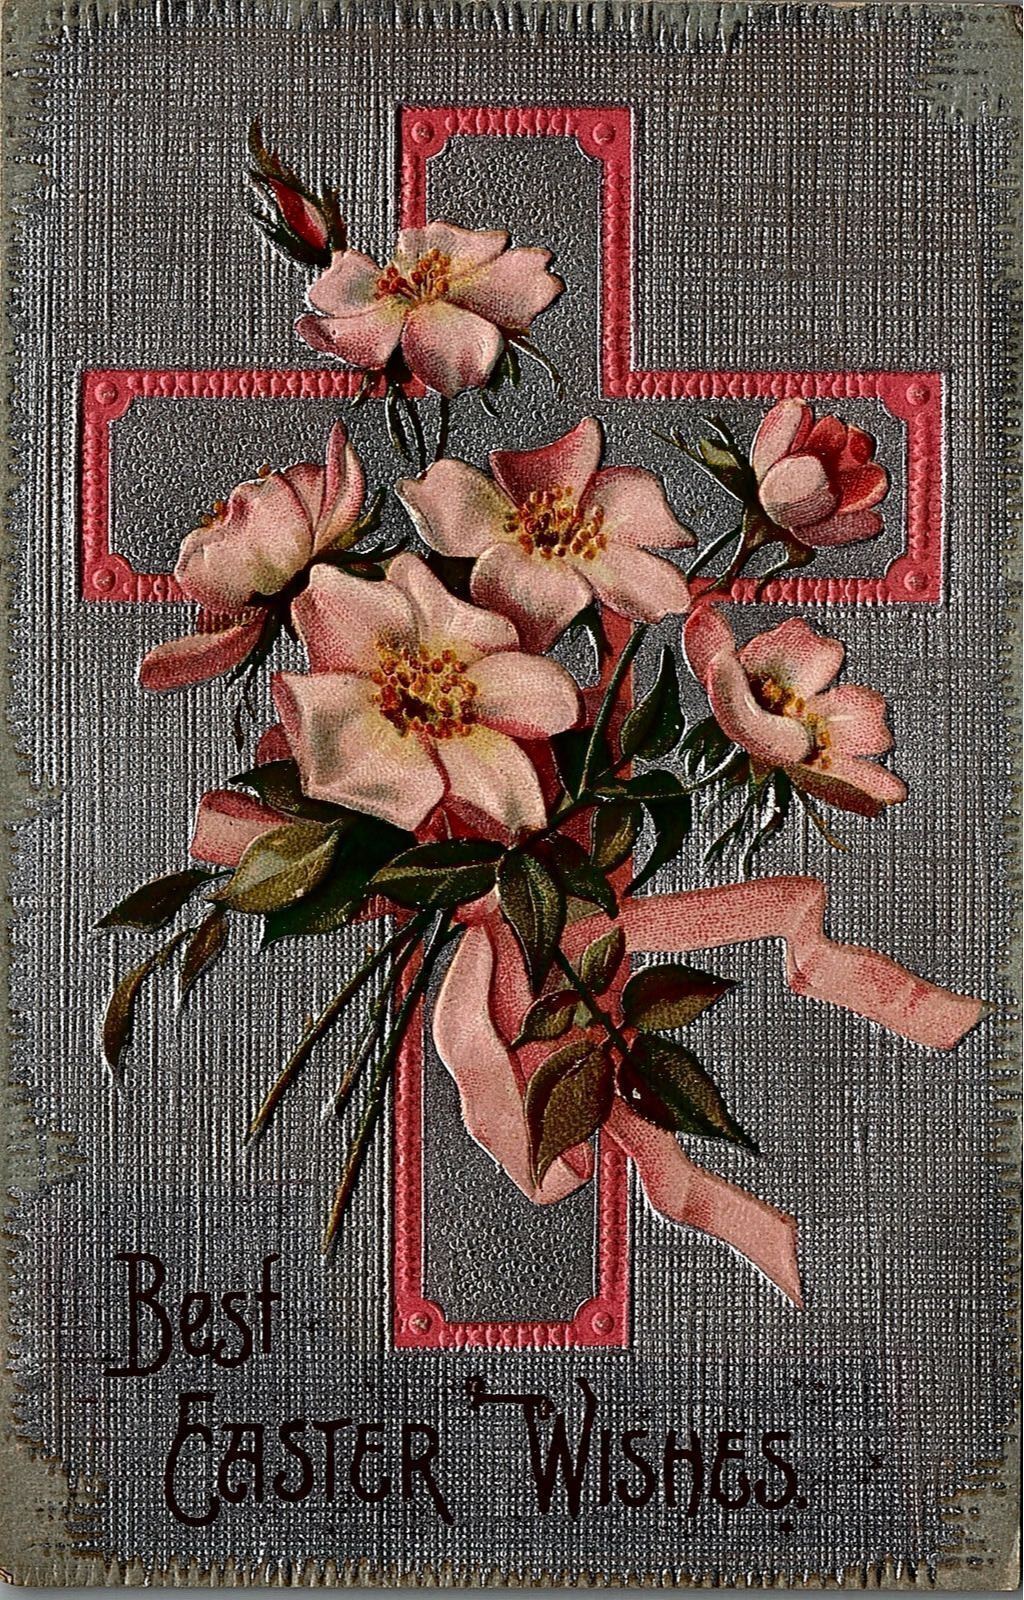 c1908 BEST EASTER WISHES CROSS AND FLOWERS EMBOSSED POSTCARD 25-83